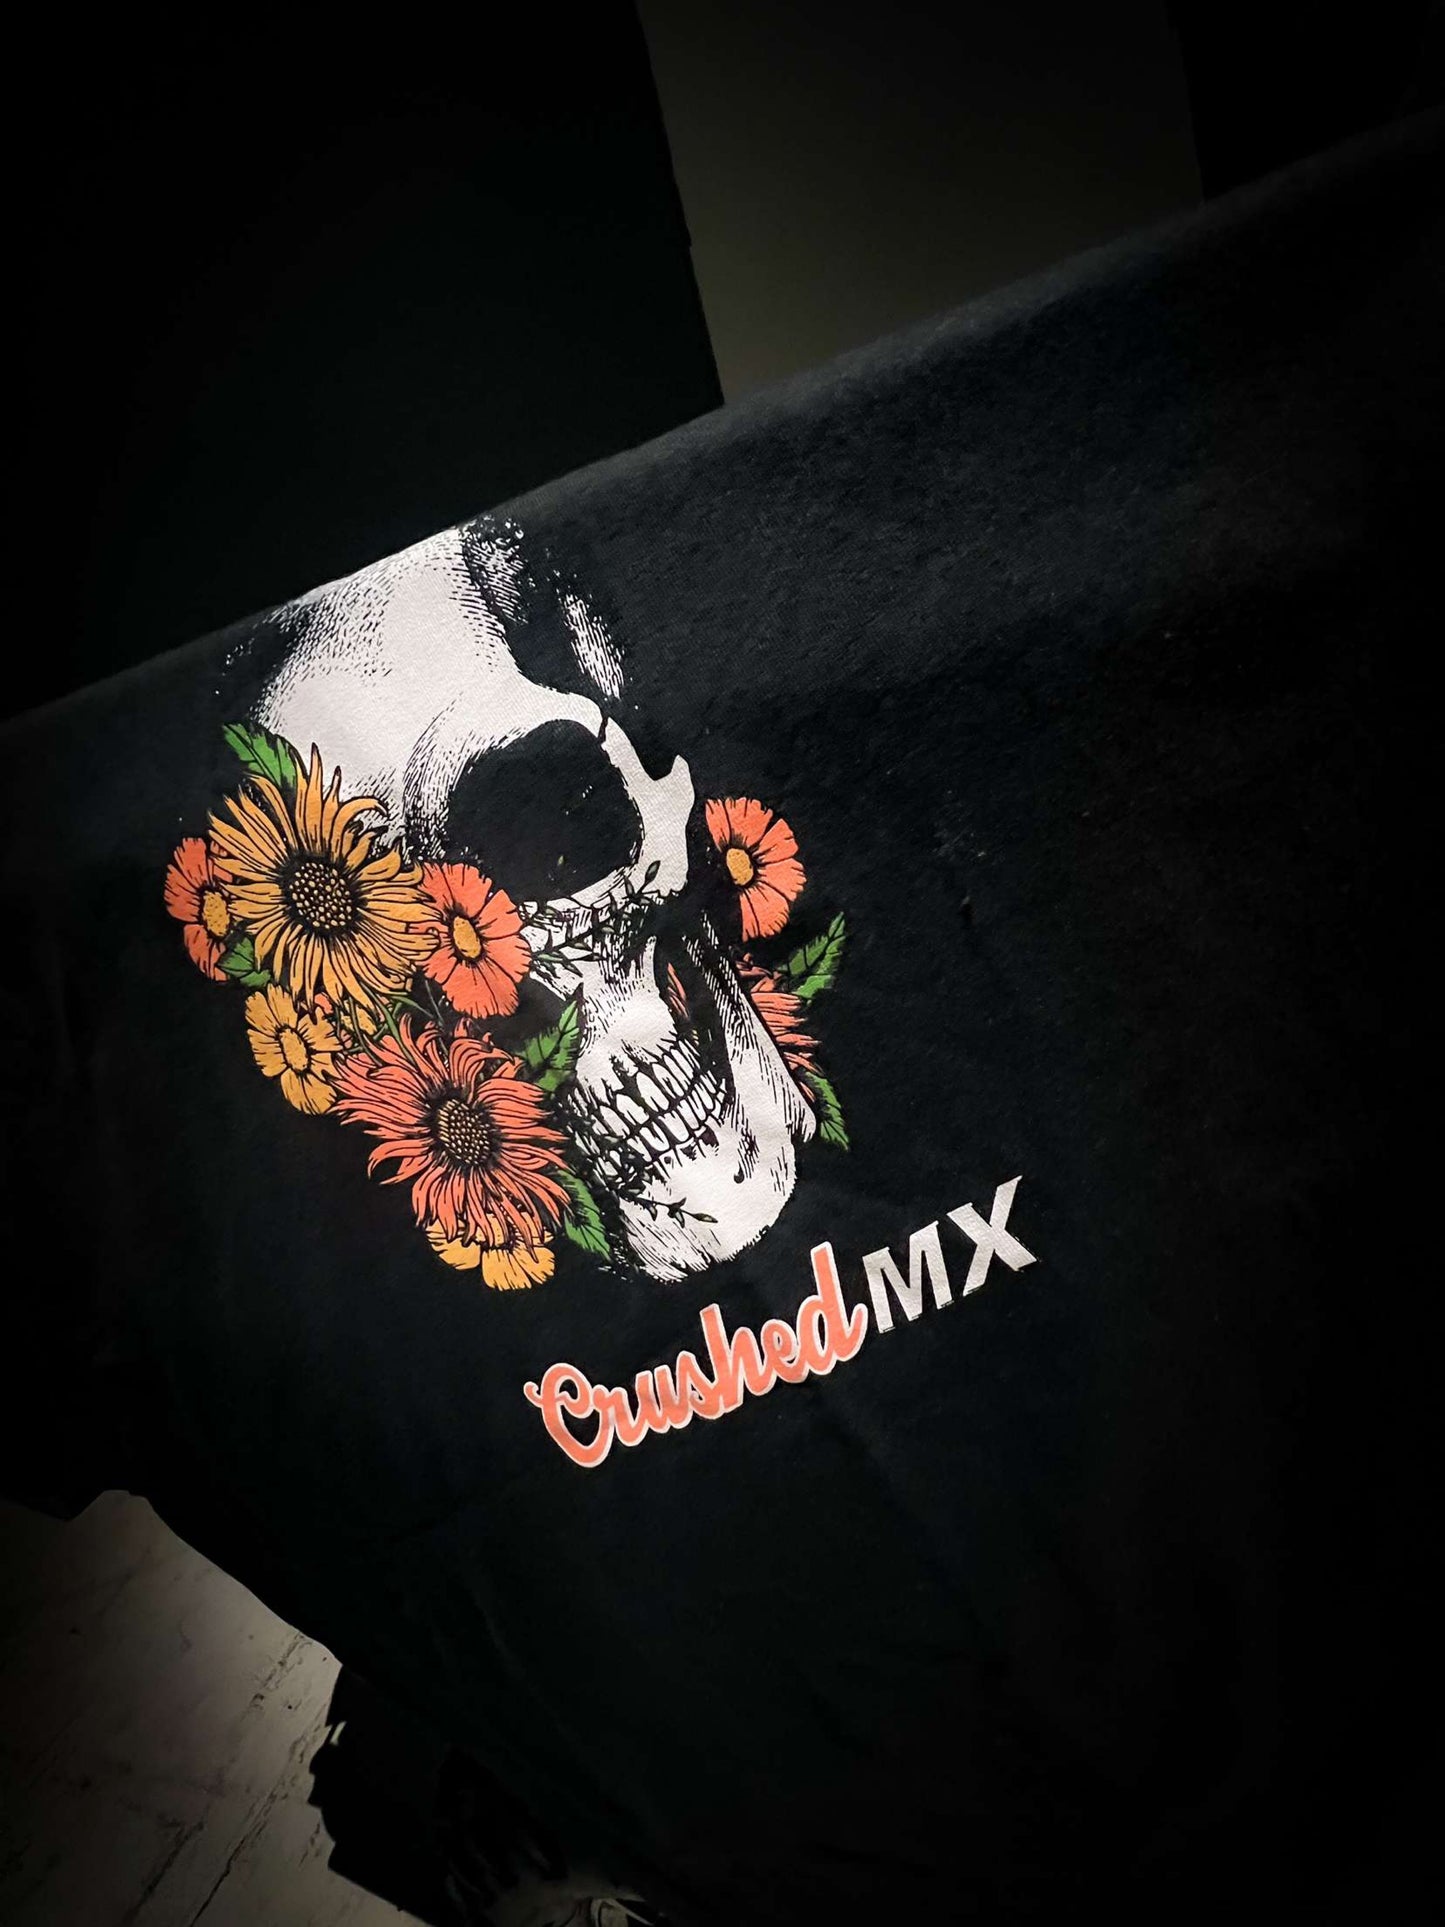 Crushed MX Skull Floral Tee